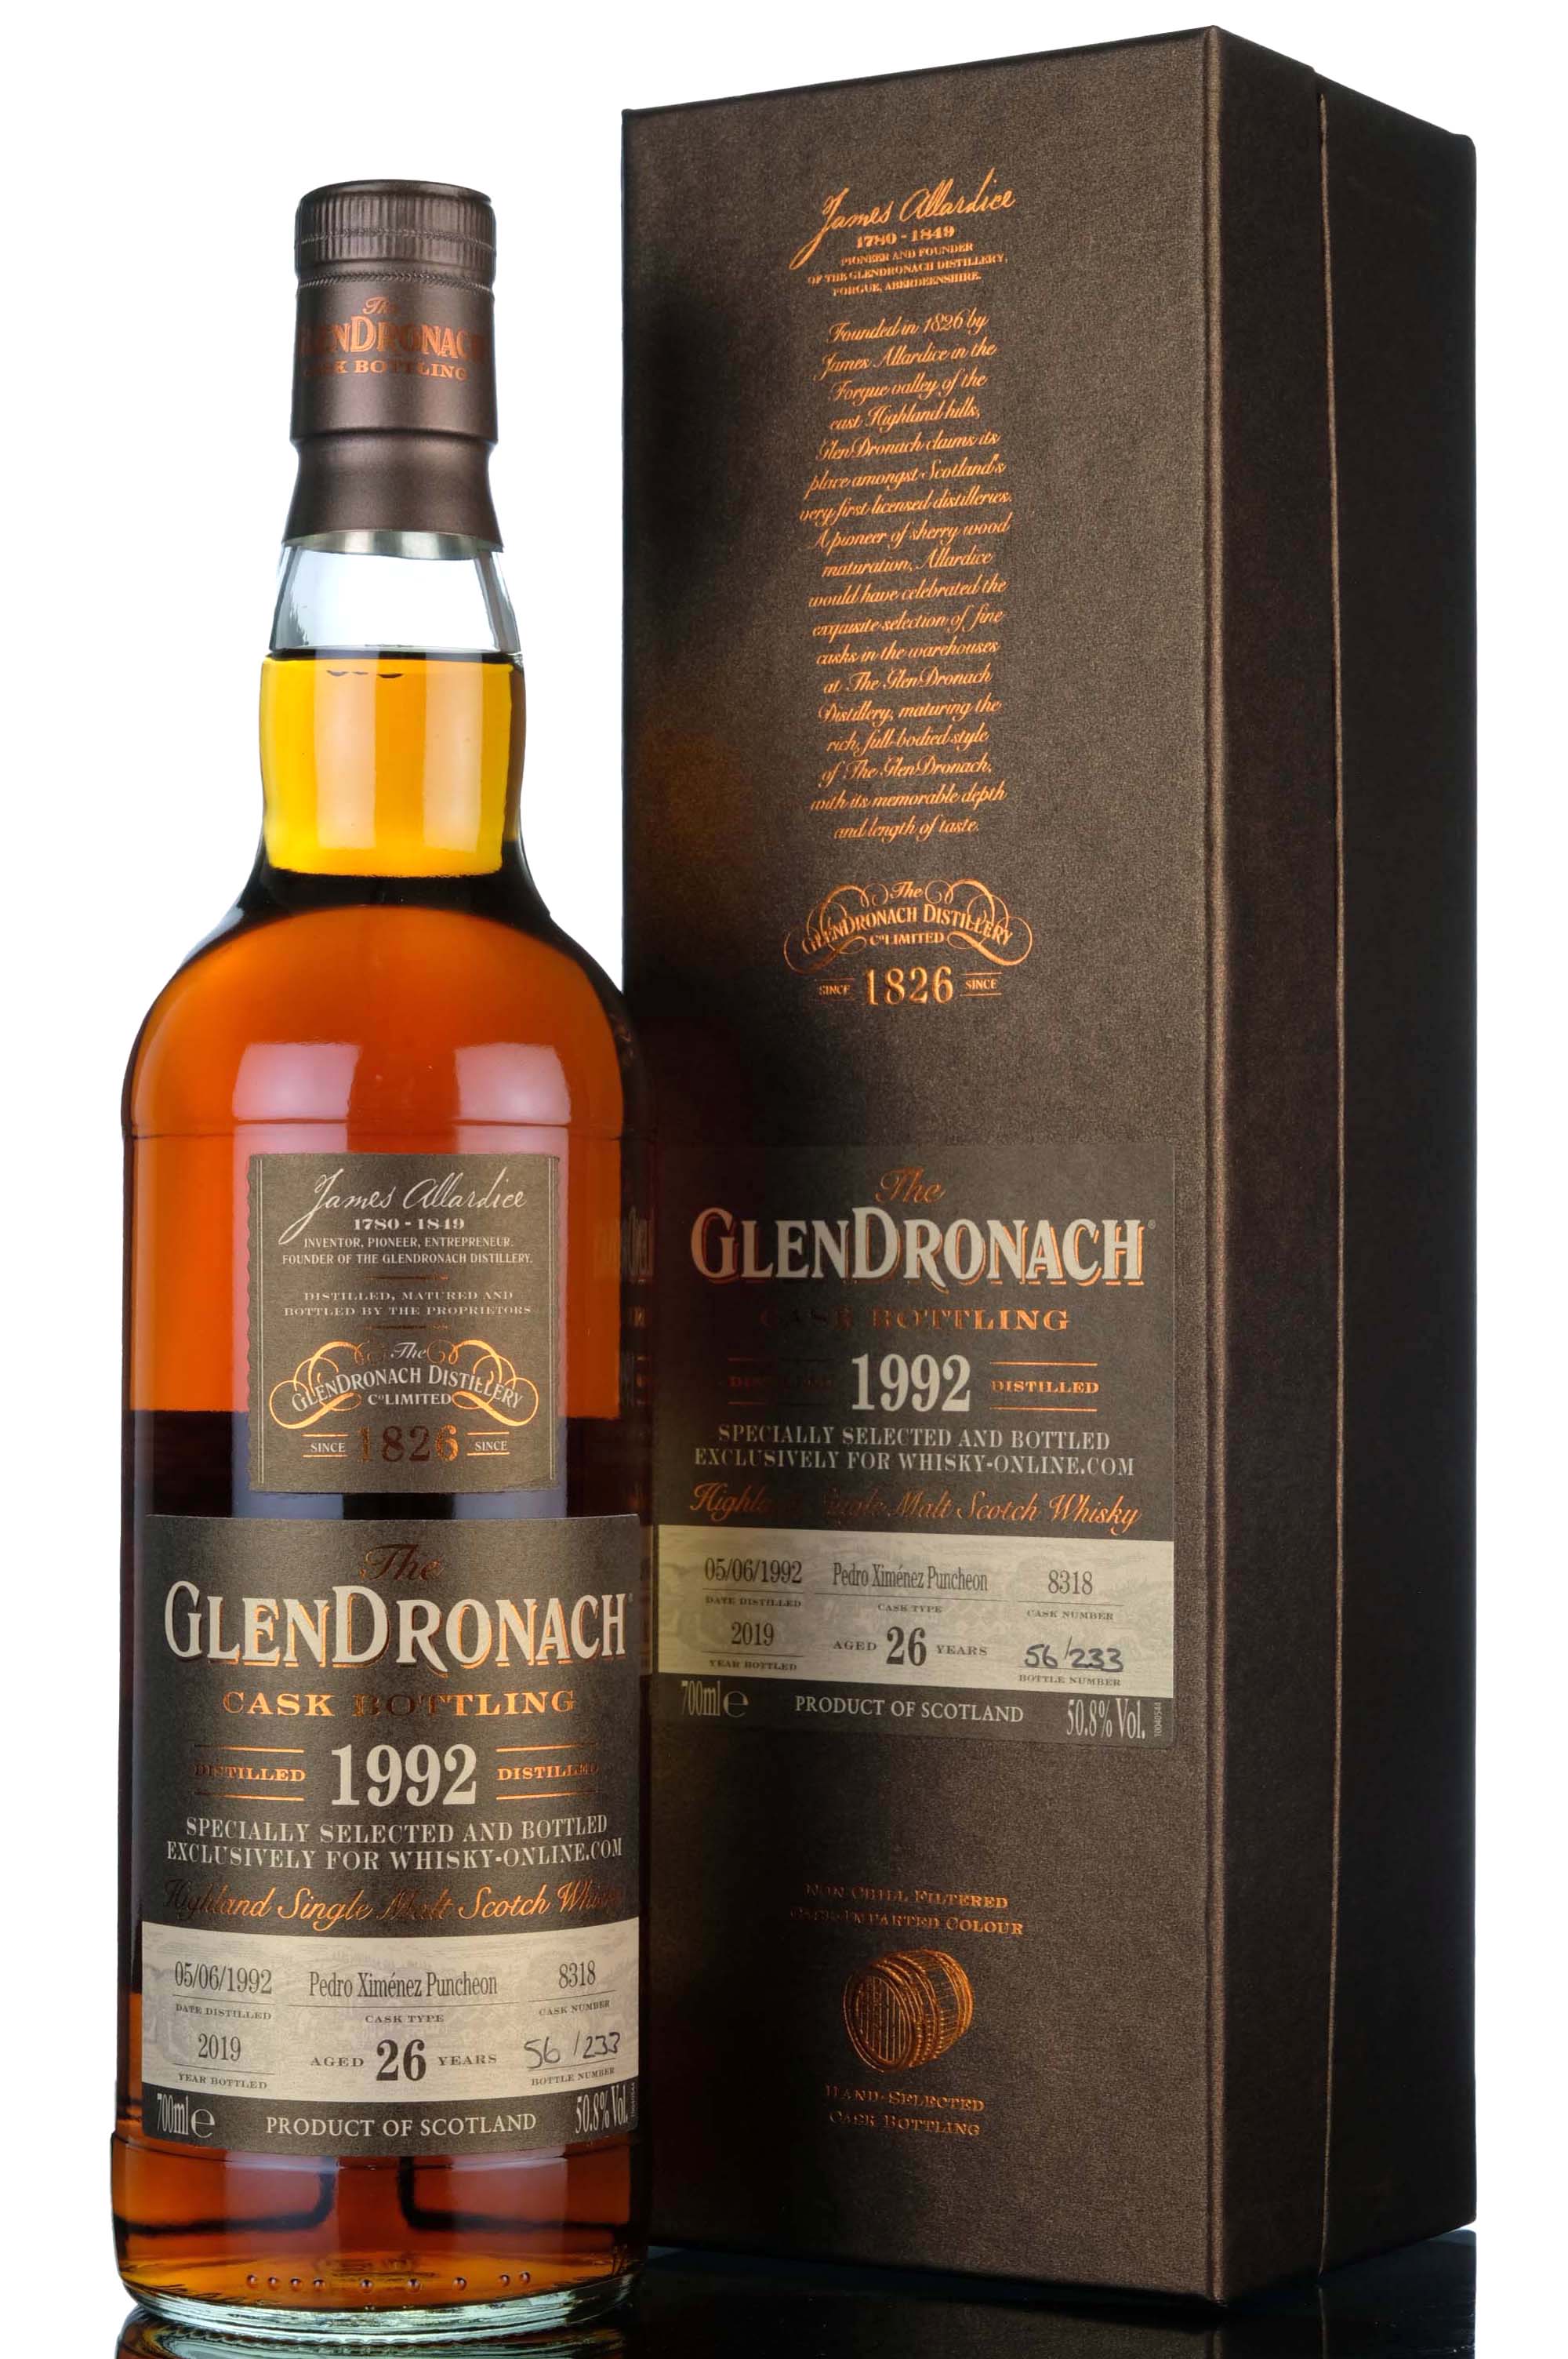 Glendronach 1992-2019 - 26 Year Old - Single Cask 8318 - Whisky-Online Exclusive